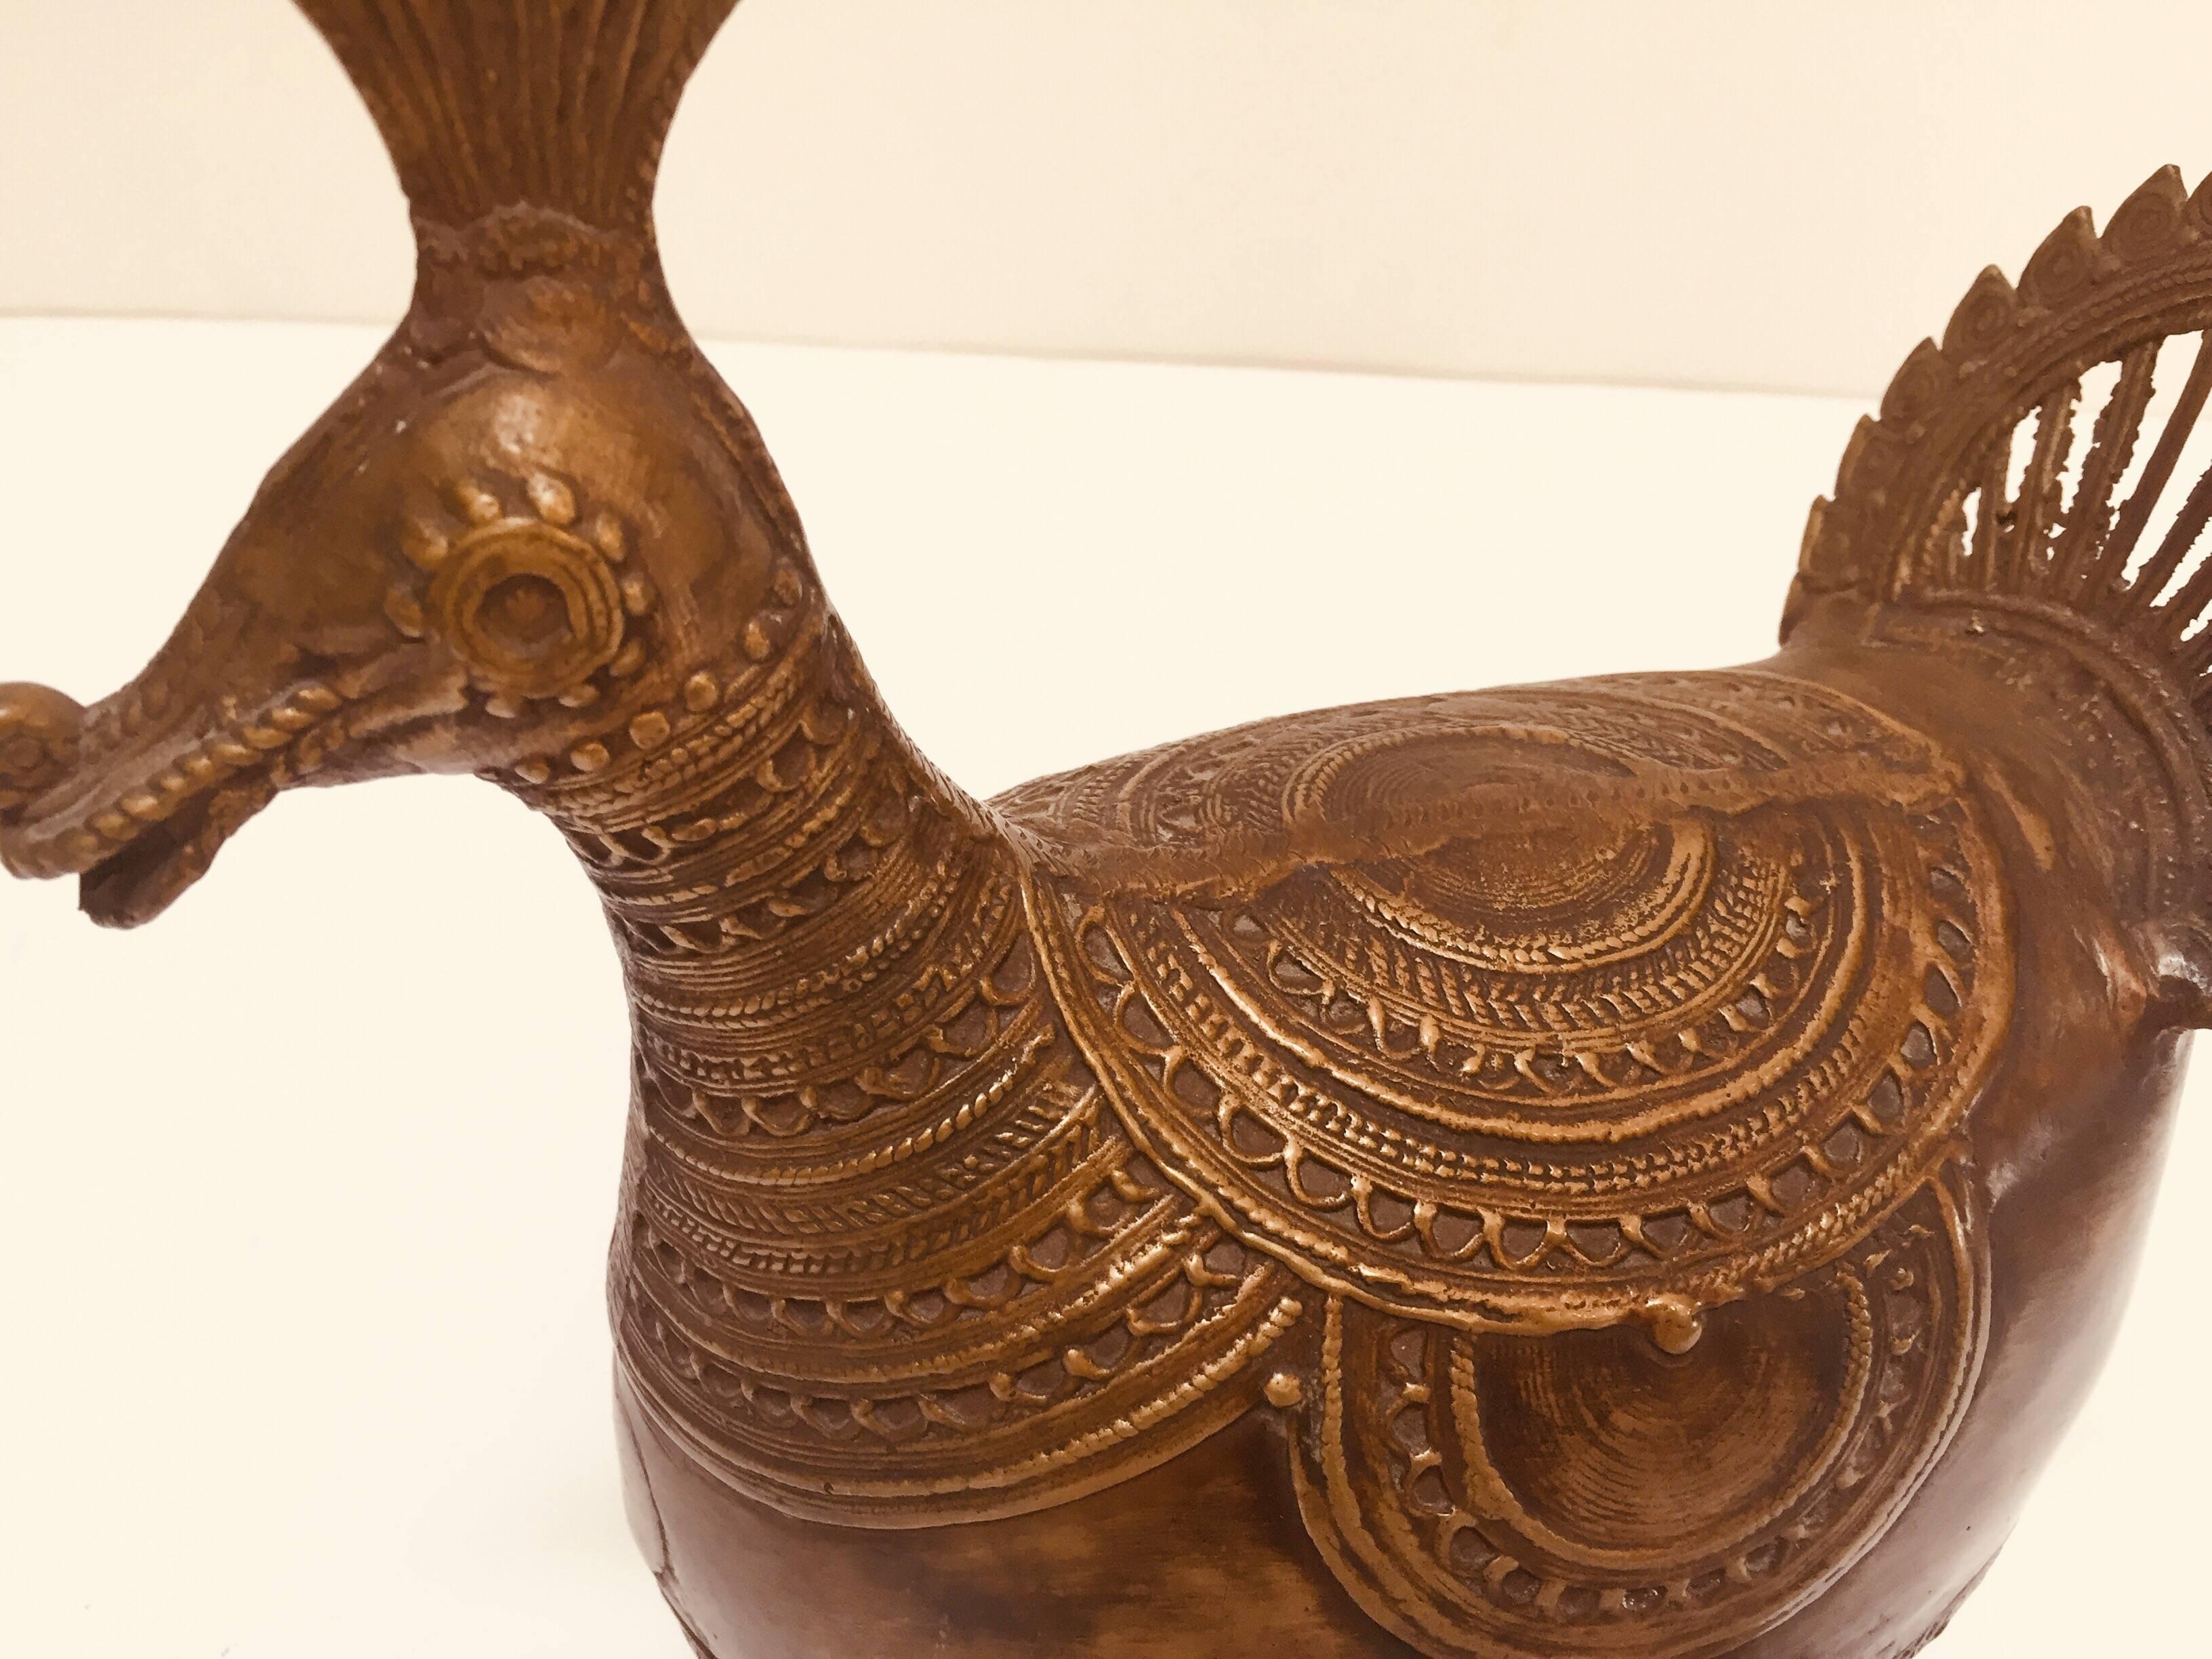 Handcrafted Indo-Islamic decorative collectible copper betel nut bird shape trinket box.
Large tribal-style heavy brass bird box.
Beautiful handcrafted large folk art style heavy bird form box with lid, latch and handle.
Delicately and intricately